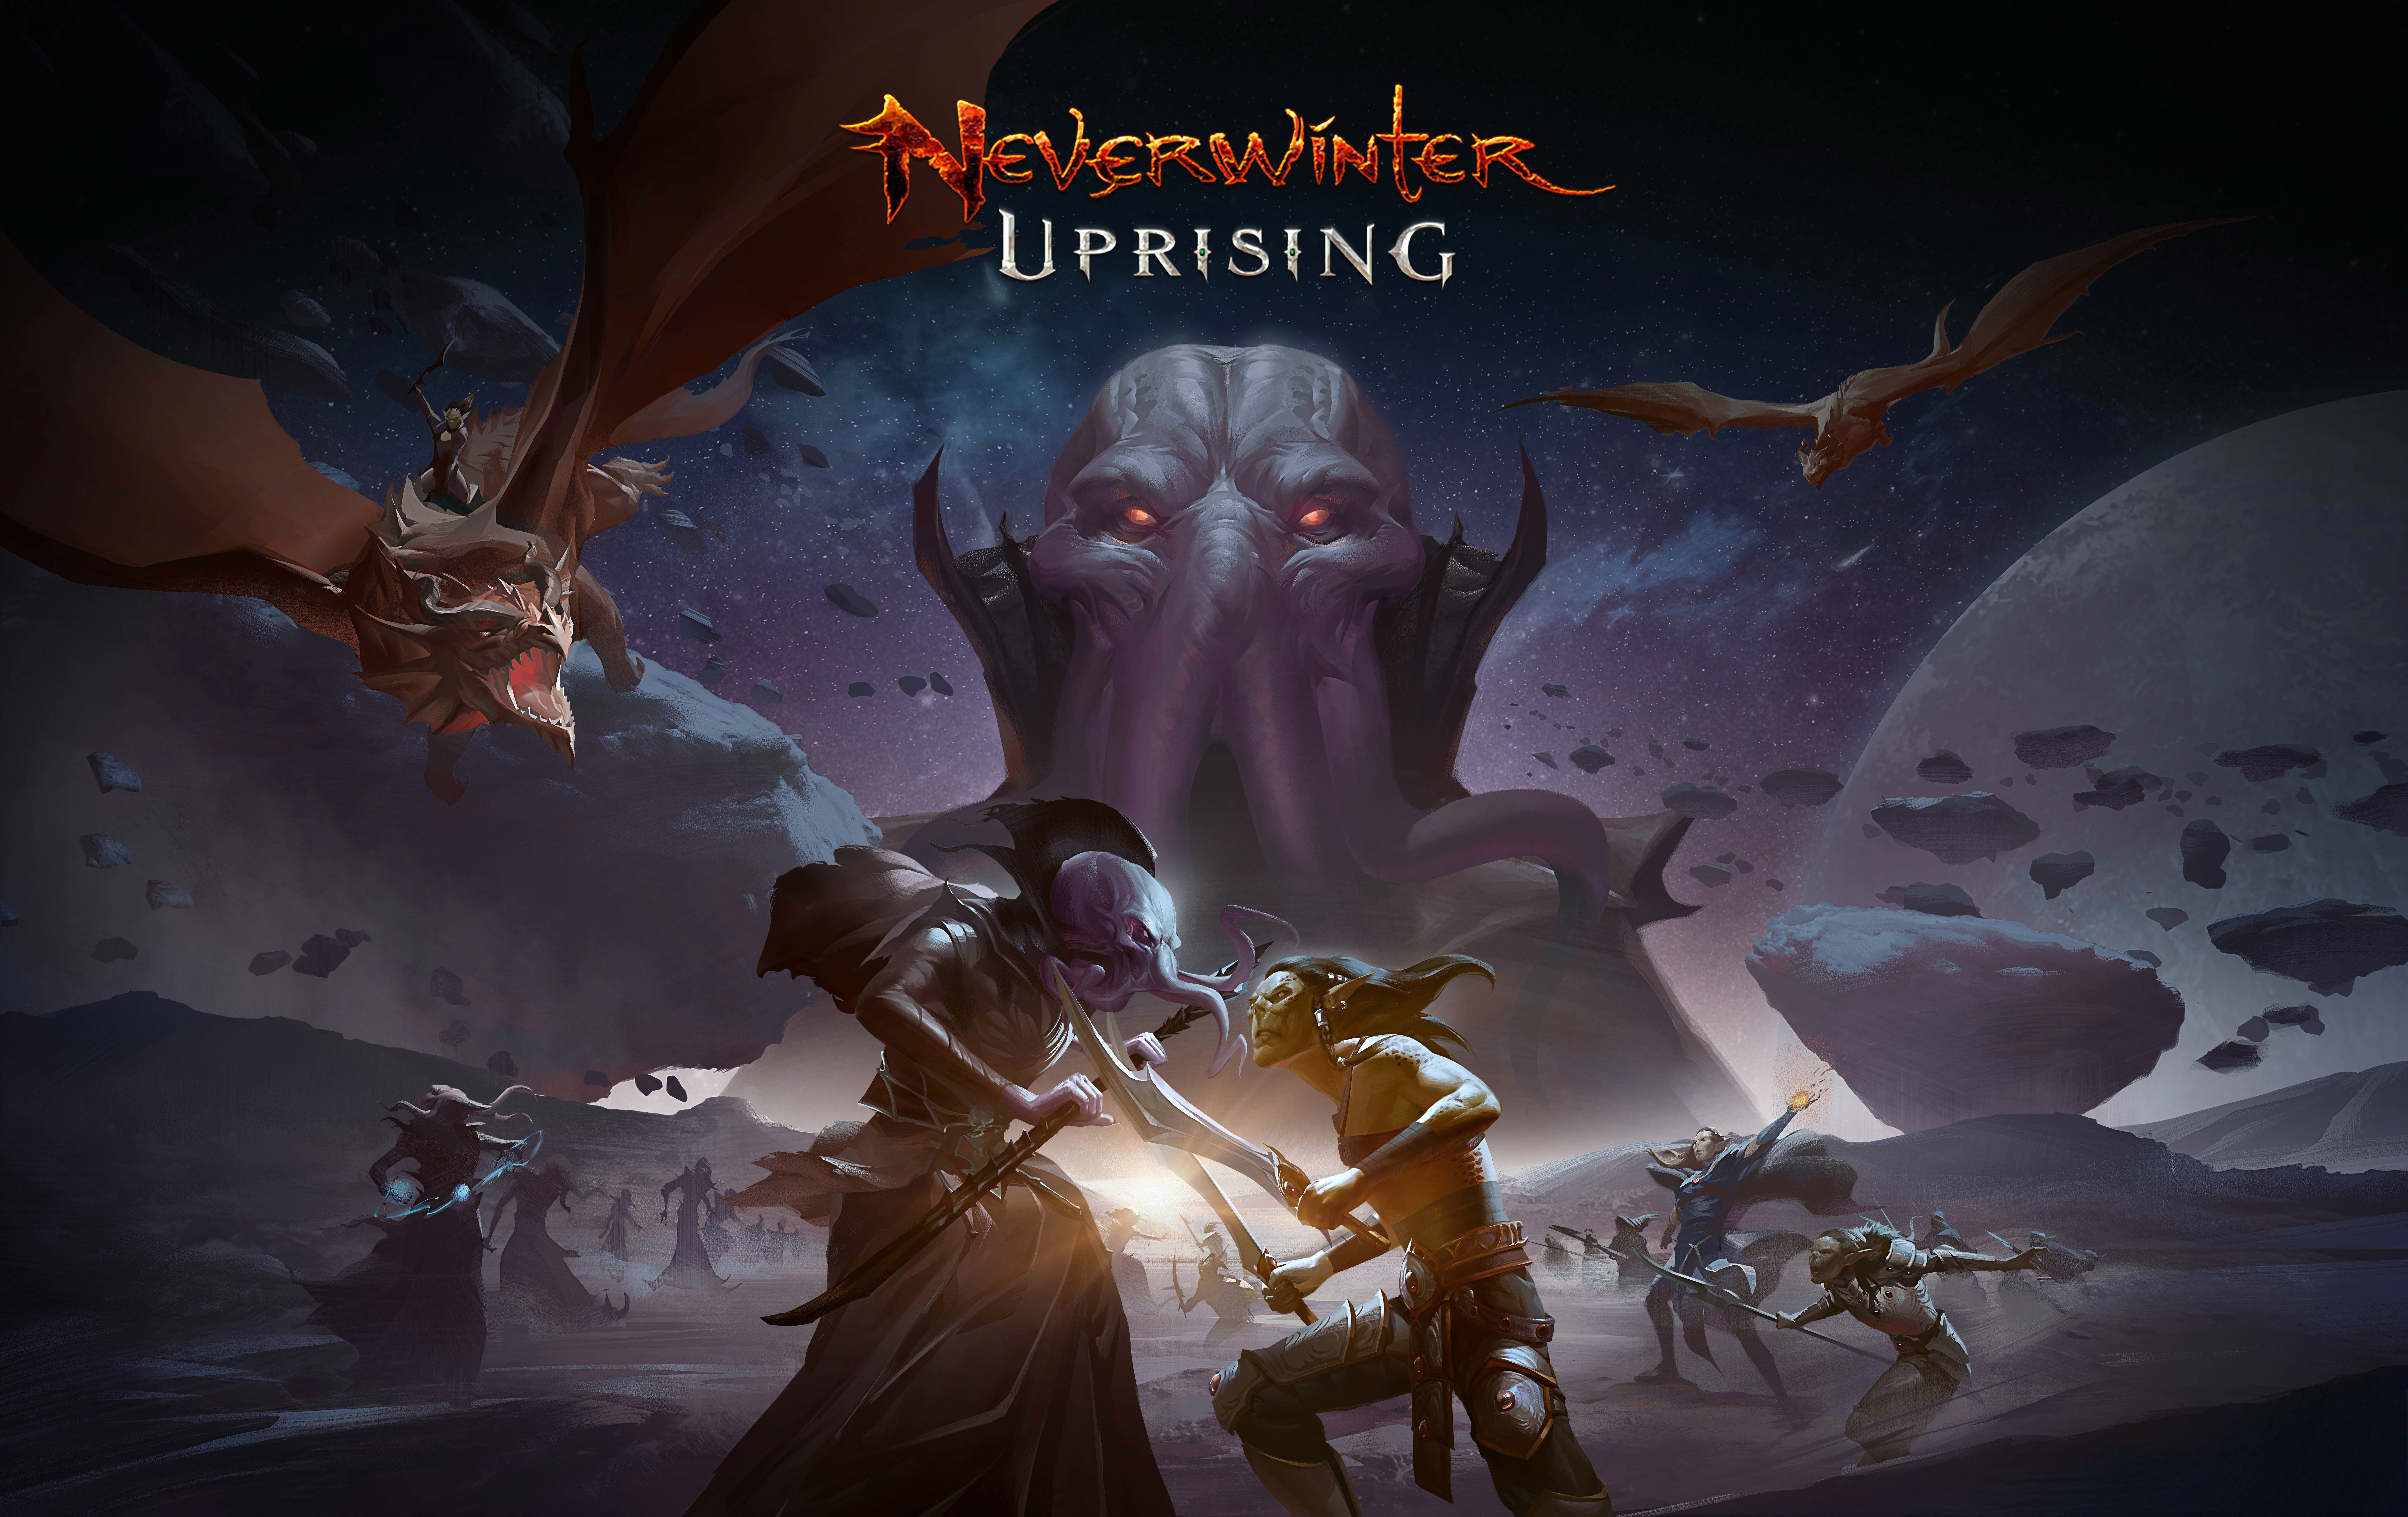 Neverwinter Uprising Wallpaper, HD Games 4K Wallpaper, Image, Photo and Background